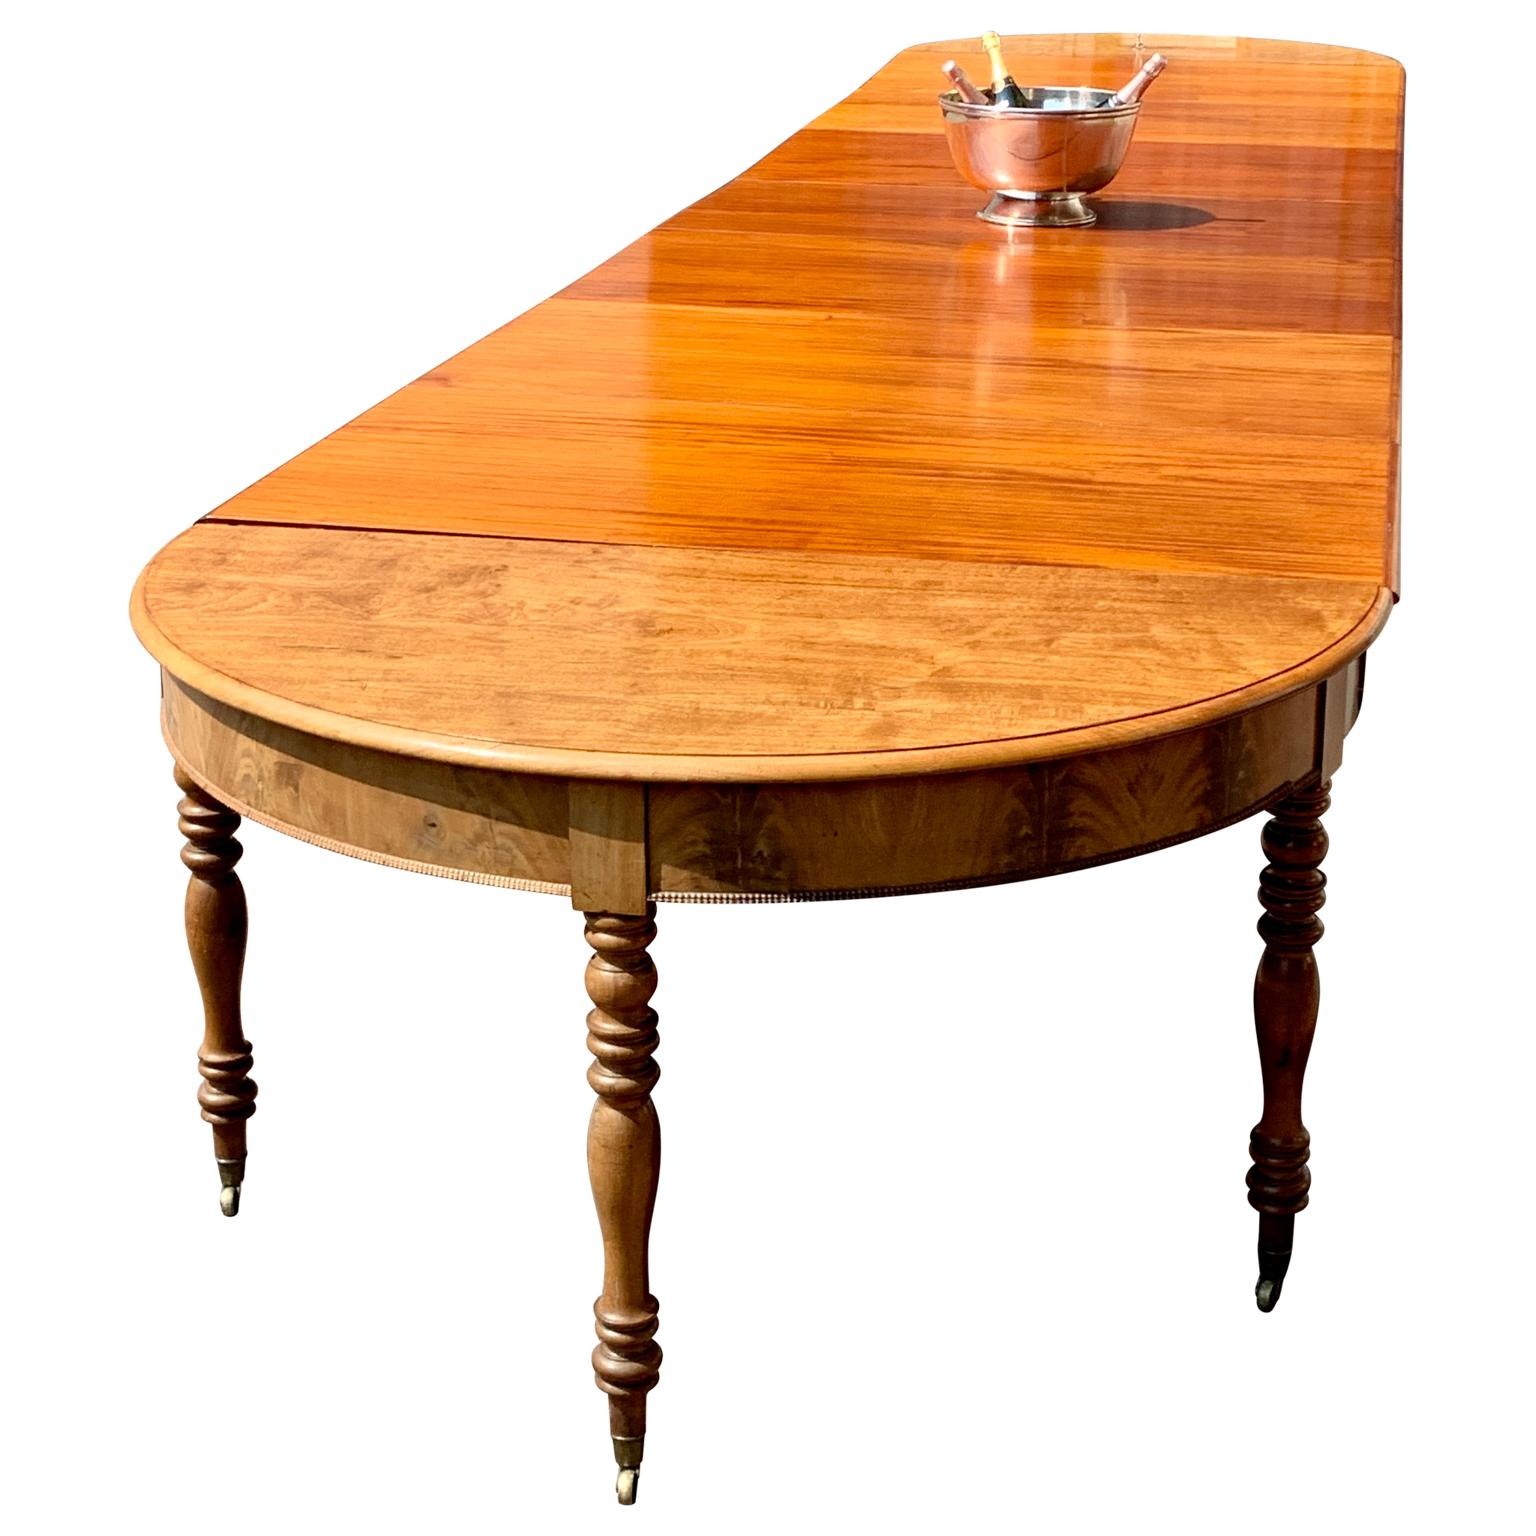 Hand-Crafted Swedish Biedermeier Long Dining Table in Mahogany